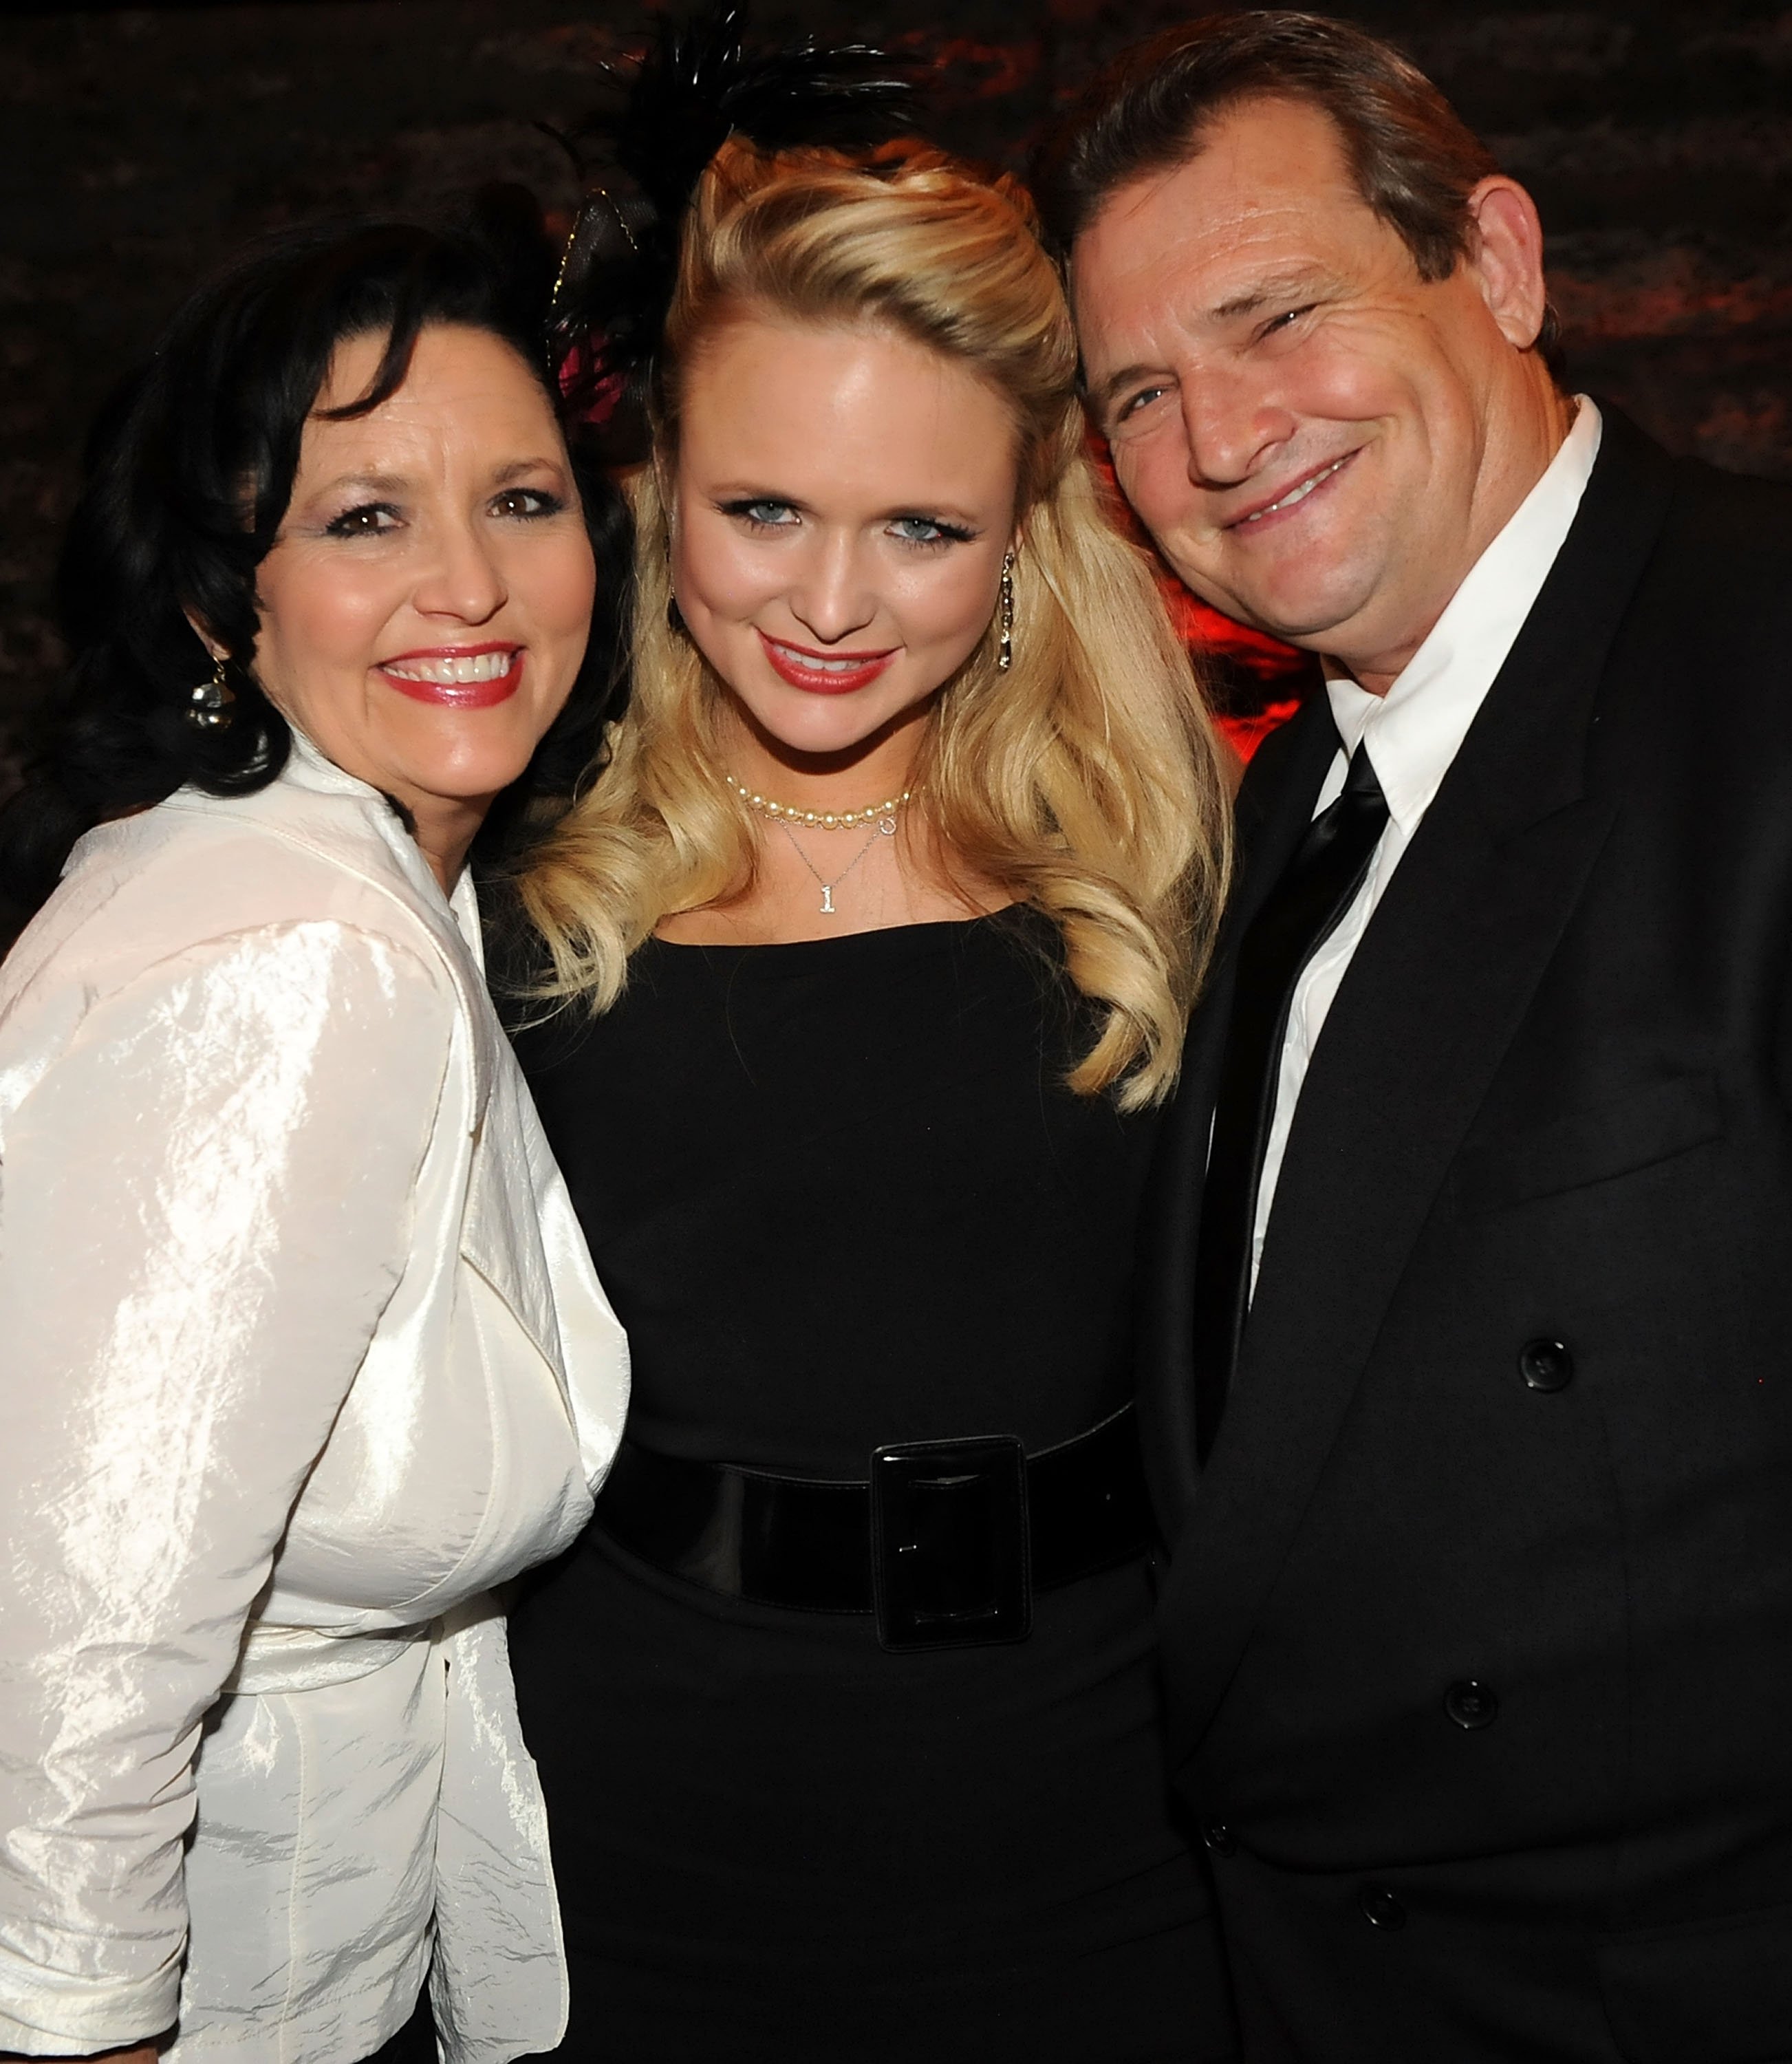 Miranda Lambert with her mother Beverly and father Richard at the Cellar to celebrate her first #1 single in Nashville, Tennessee on February 26, 2010 | Photo: Getty Images